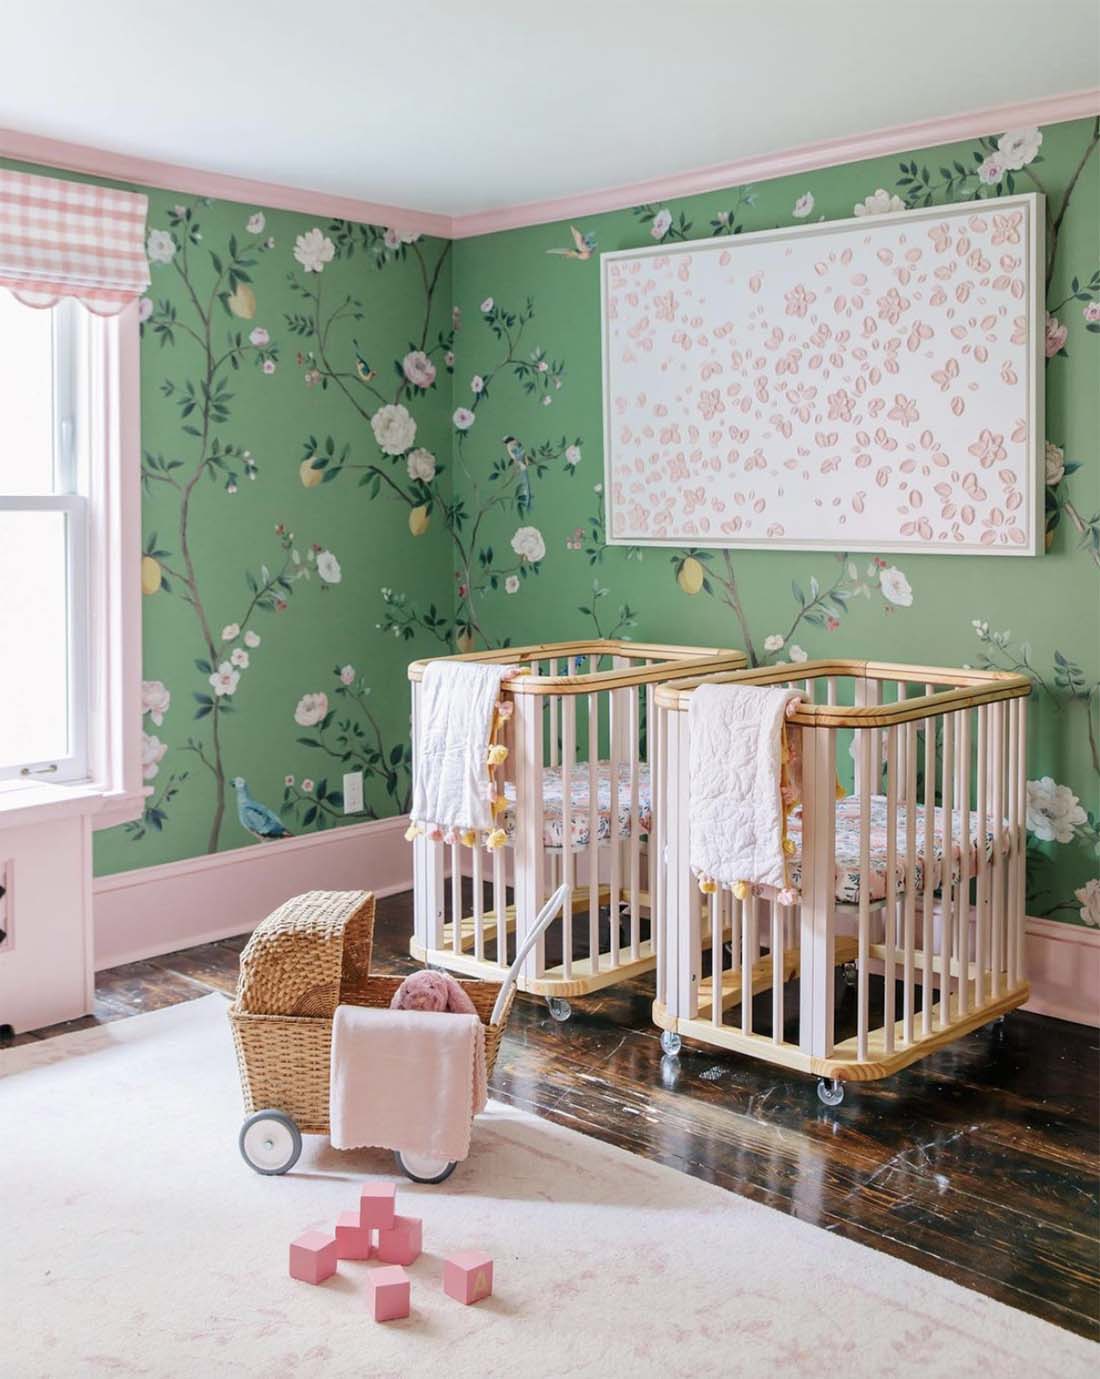 green-floral-wallpaper-with-pink-accents-in-twin-girls-nursery-by-jenniferbeekhunter